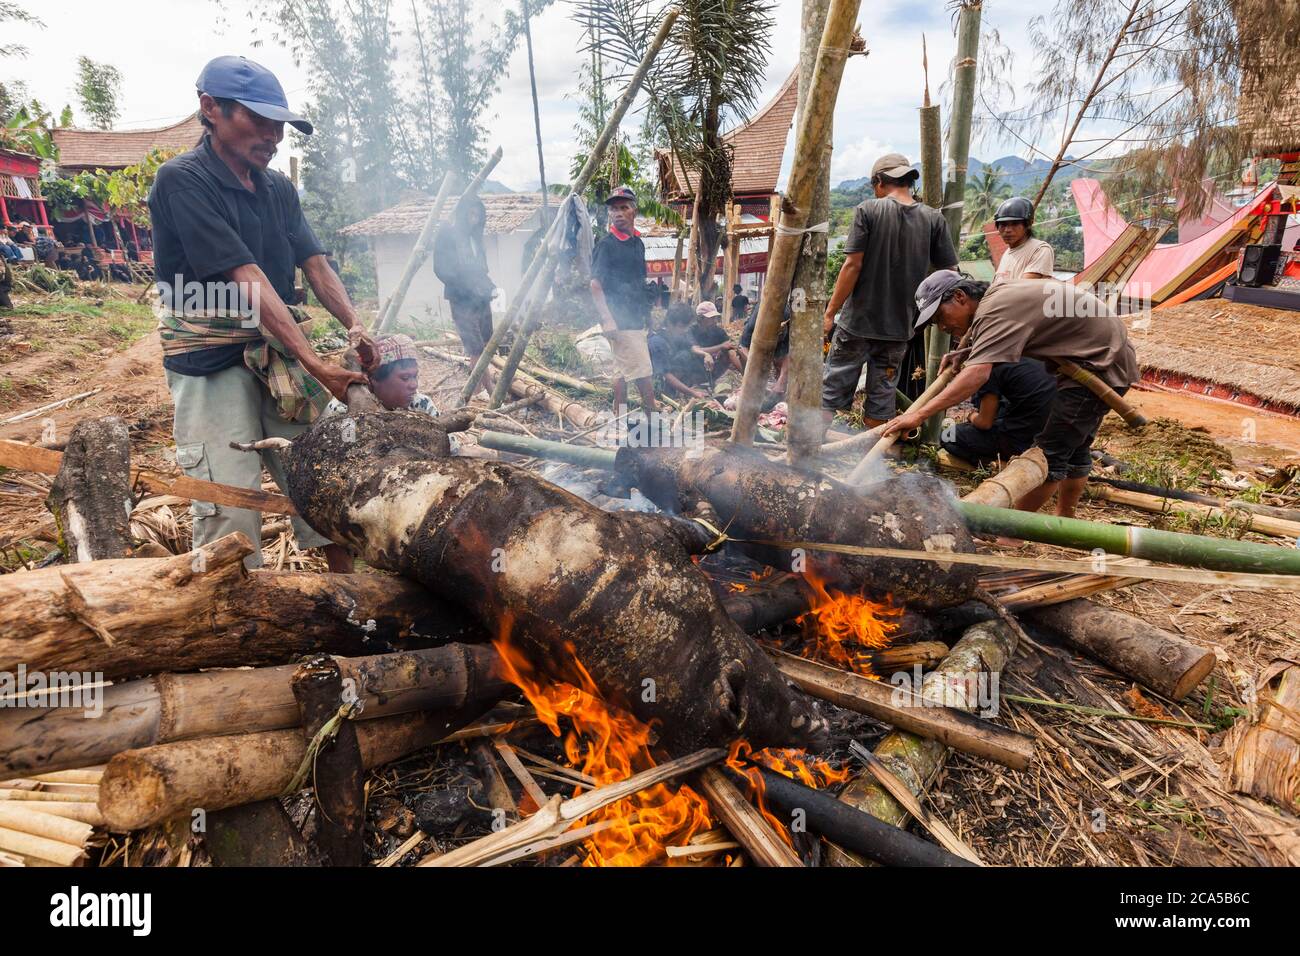 Indonesia, Sulawesi, Tana Toraja, Makale, funeral ceremony, cleaning pork meat in fire Stock Photo